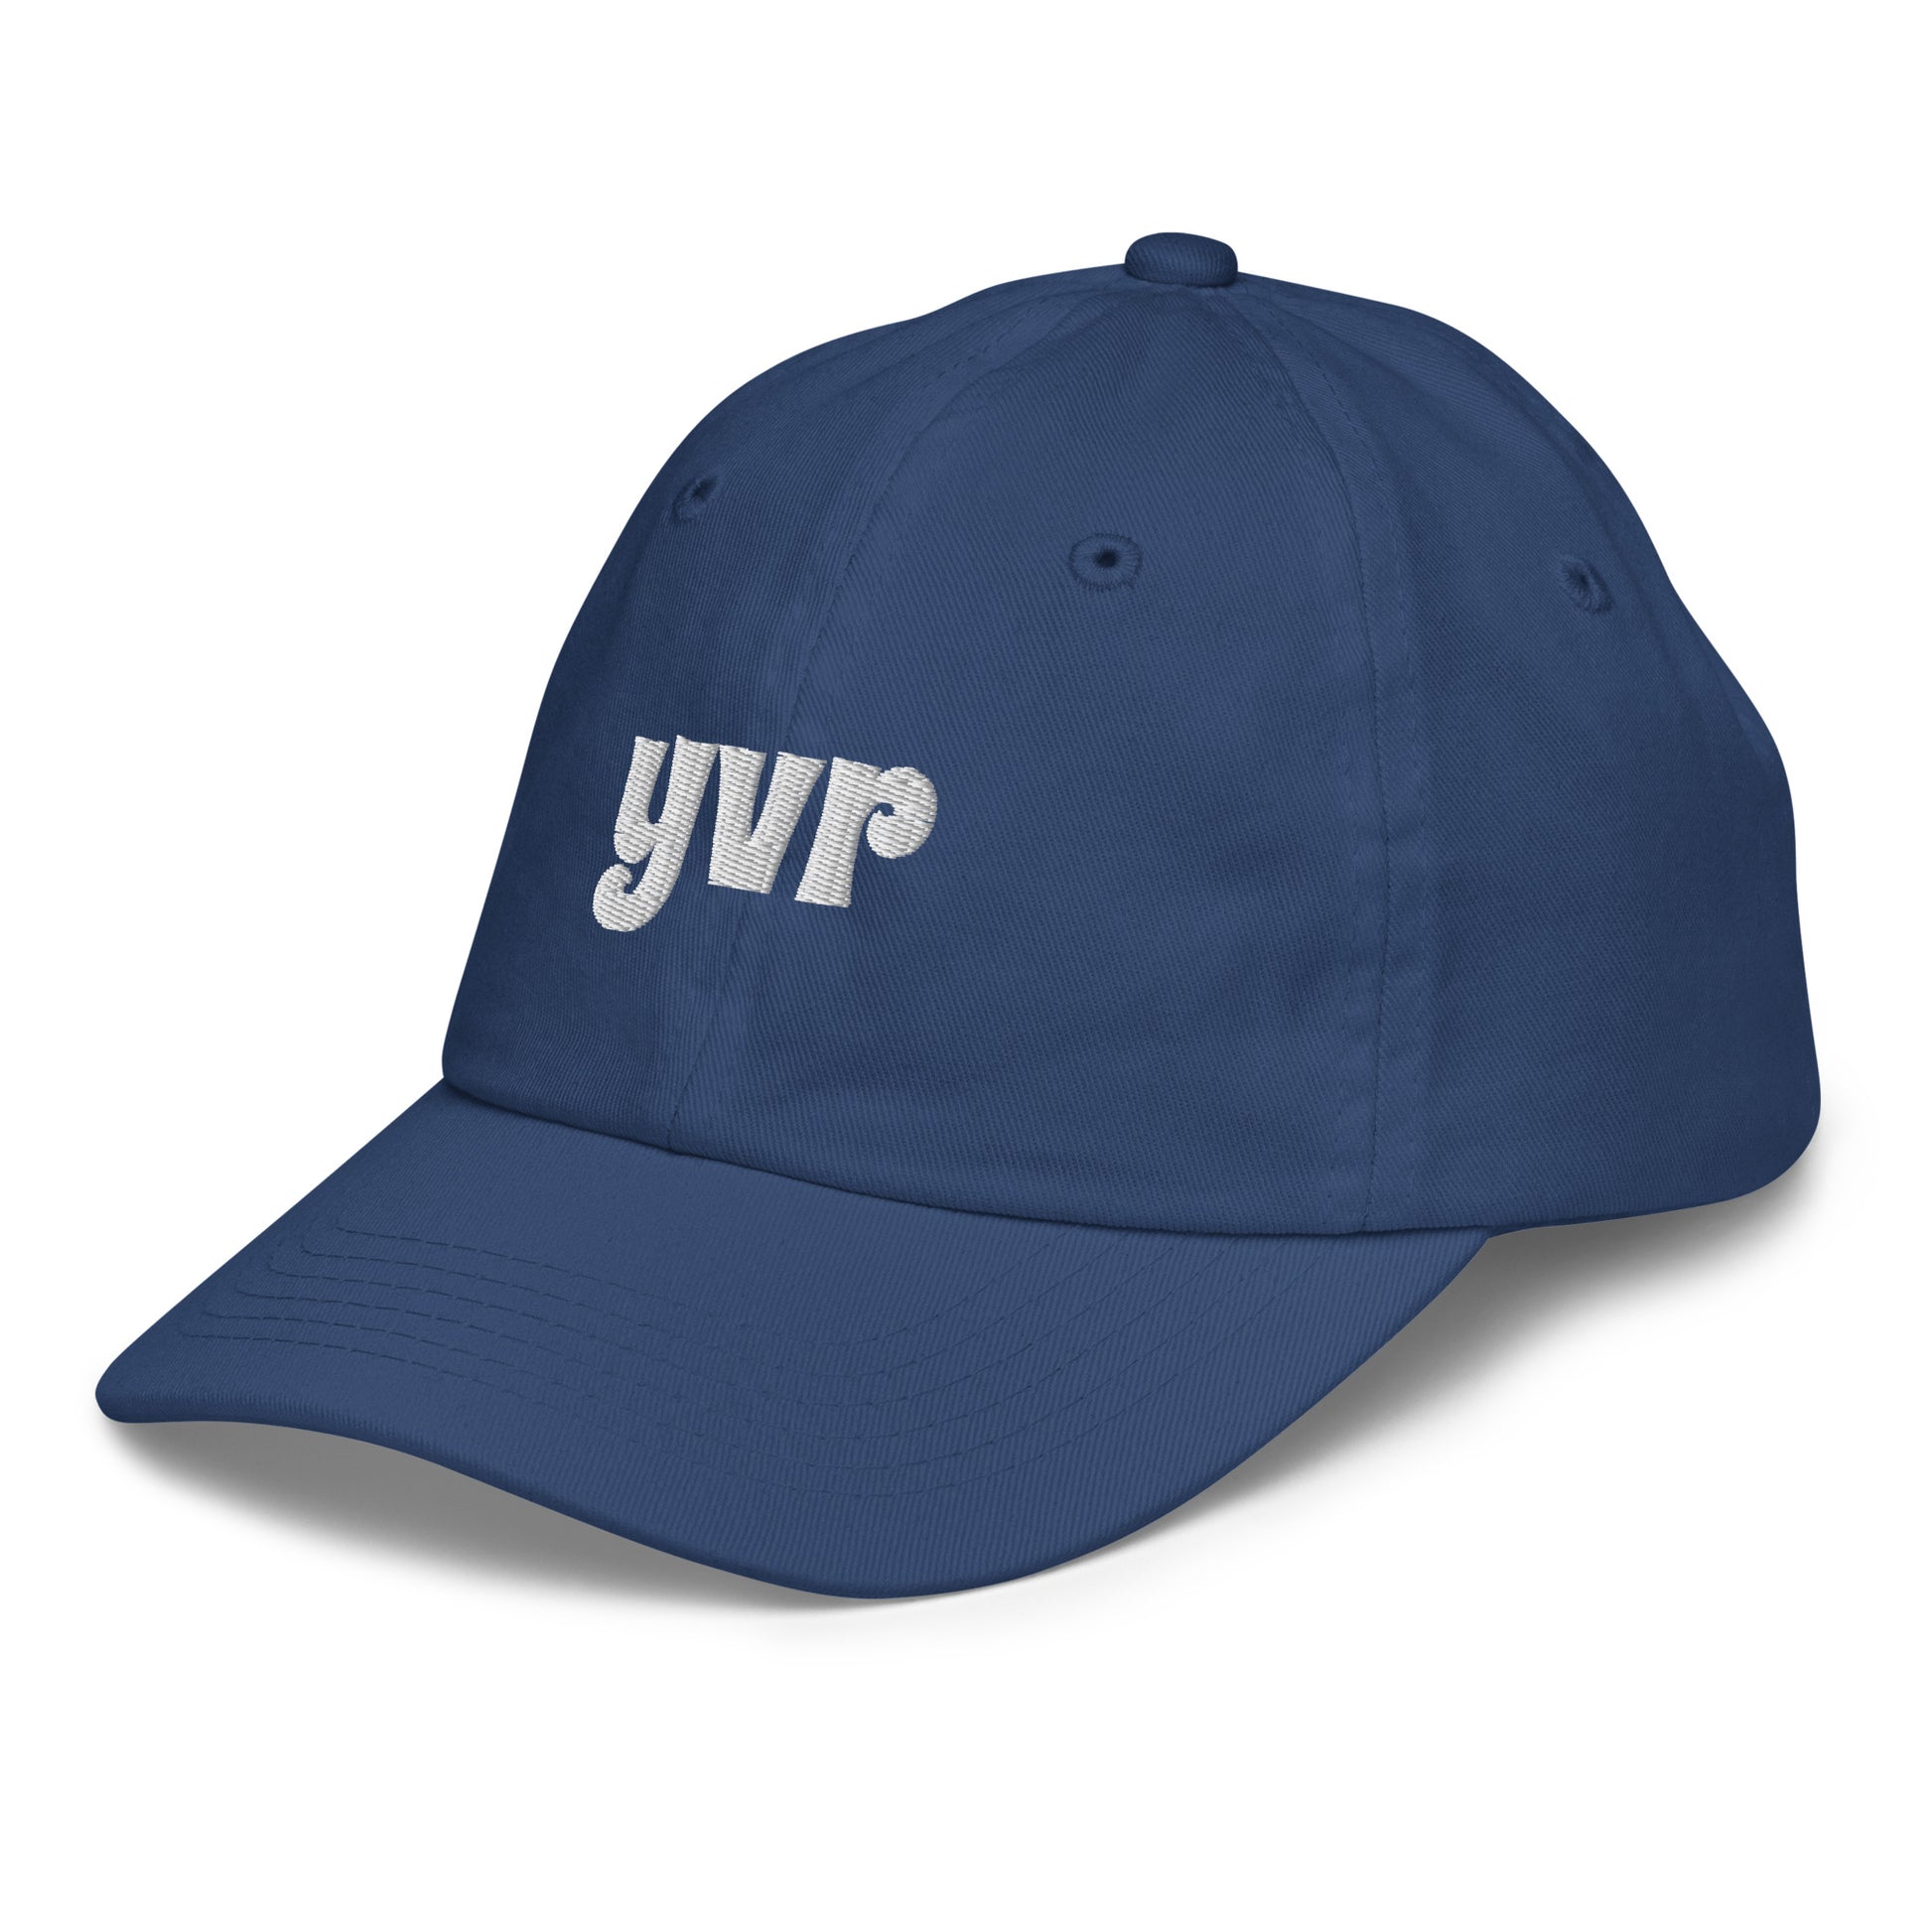 Groovy Kid's Baseball Cap - White • YVR Vancouver • YHM Designs - Image 16